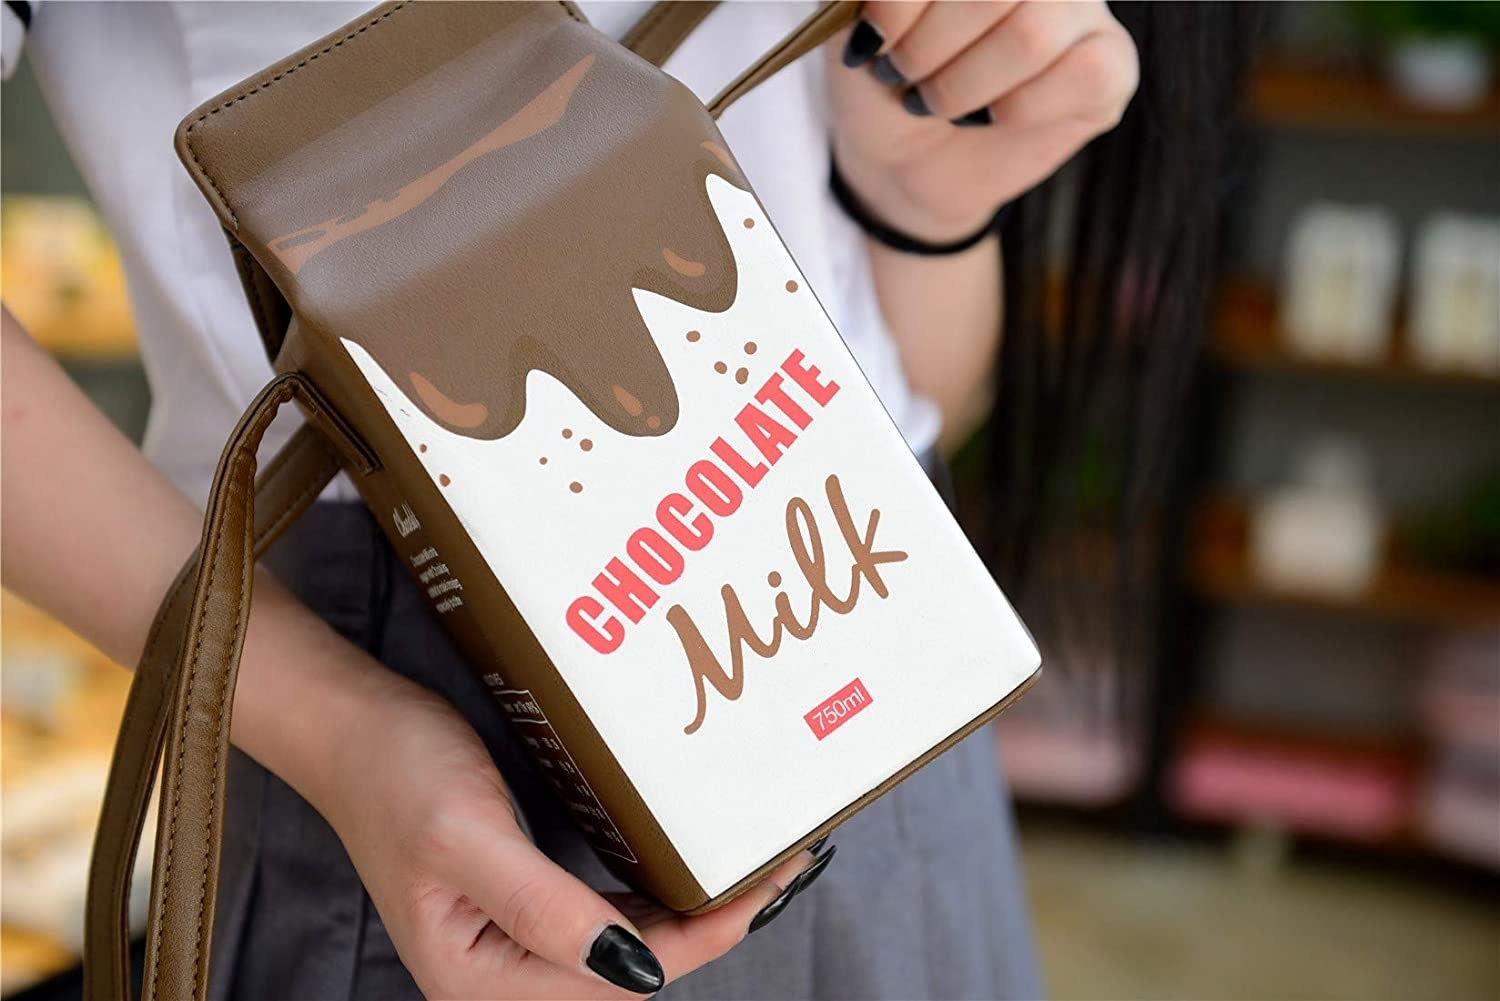 A person holding a chocolate milk handbag in a store